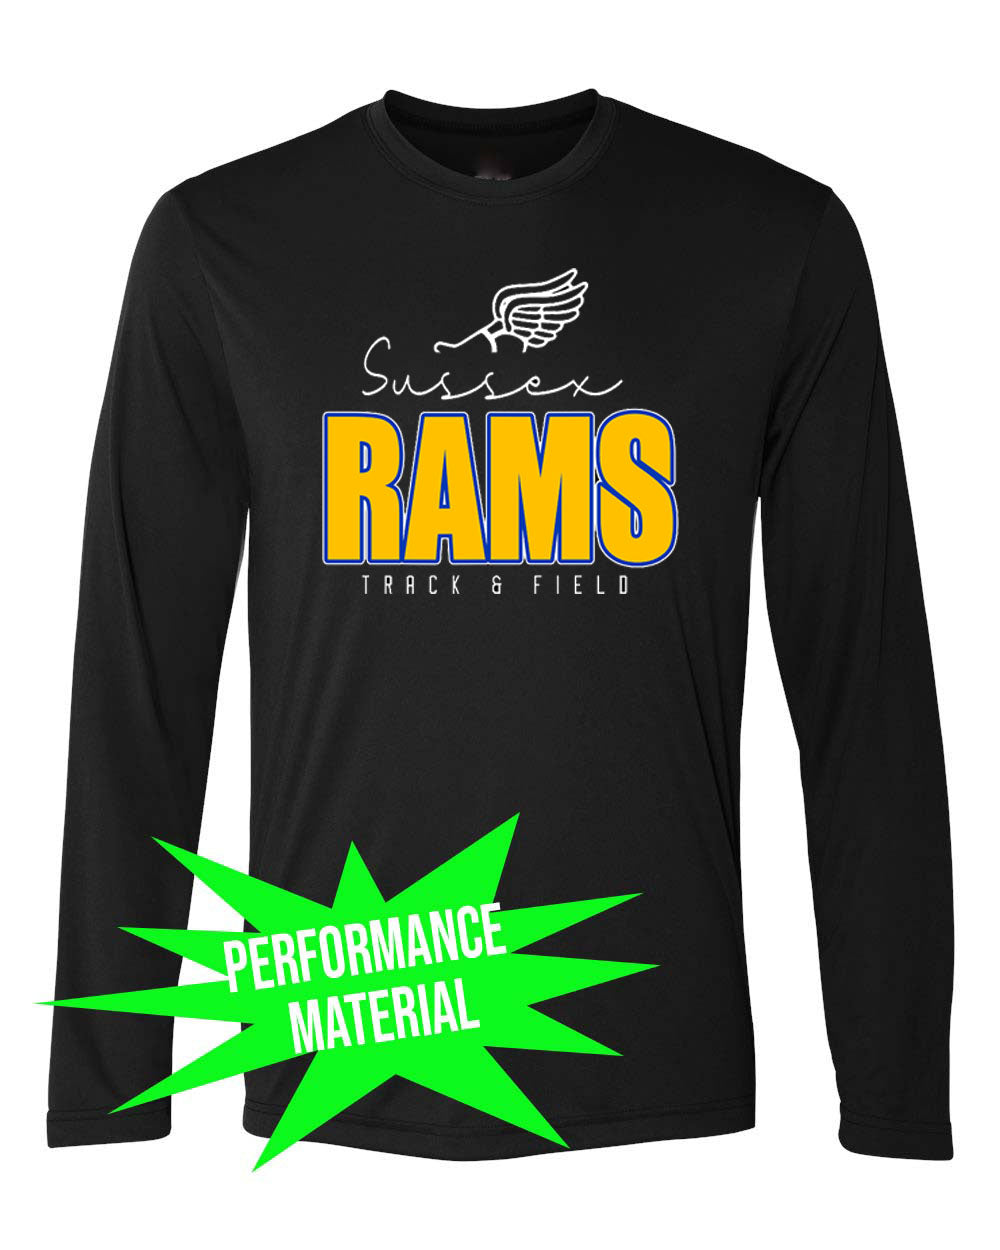 Sussex Rams Track Performance Material Long Sleeve Shirt Design 4